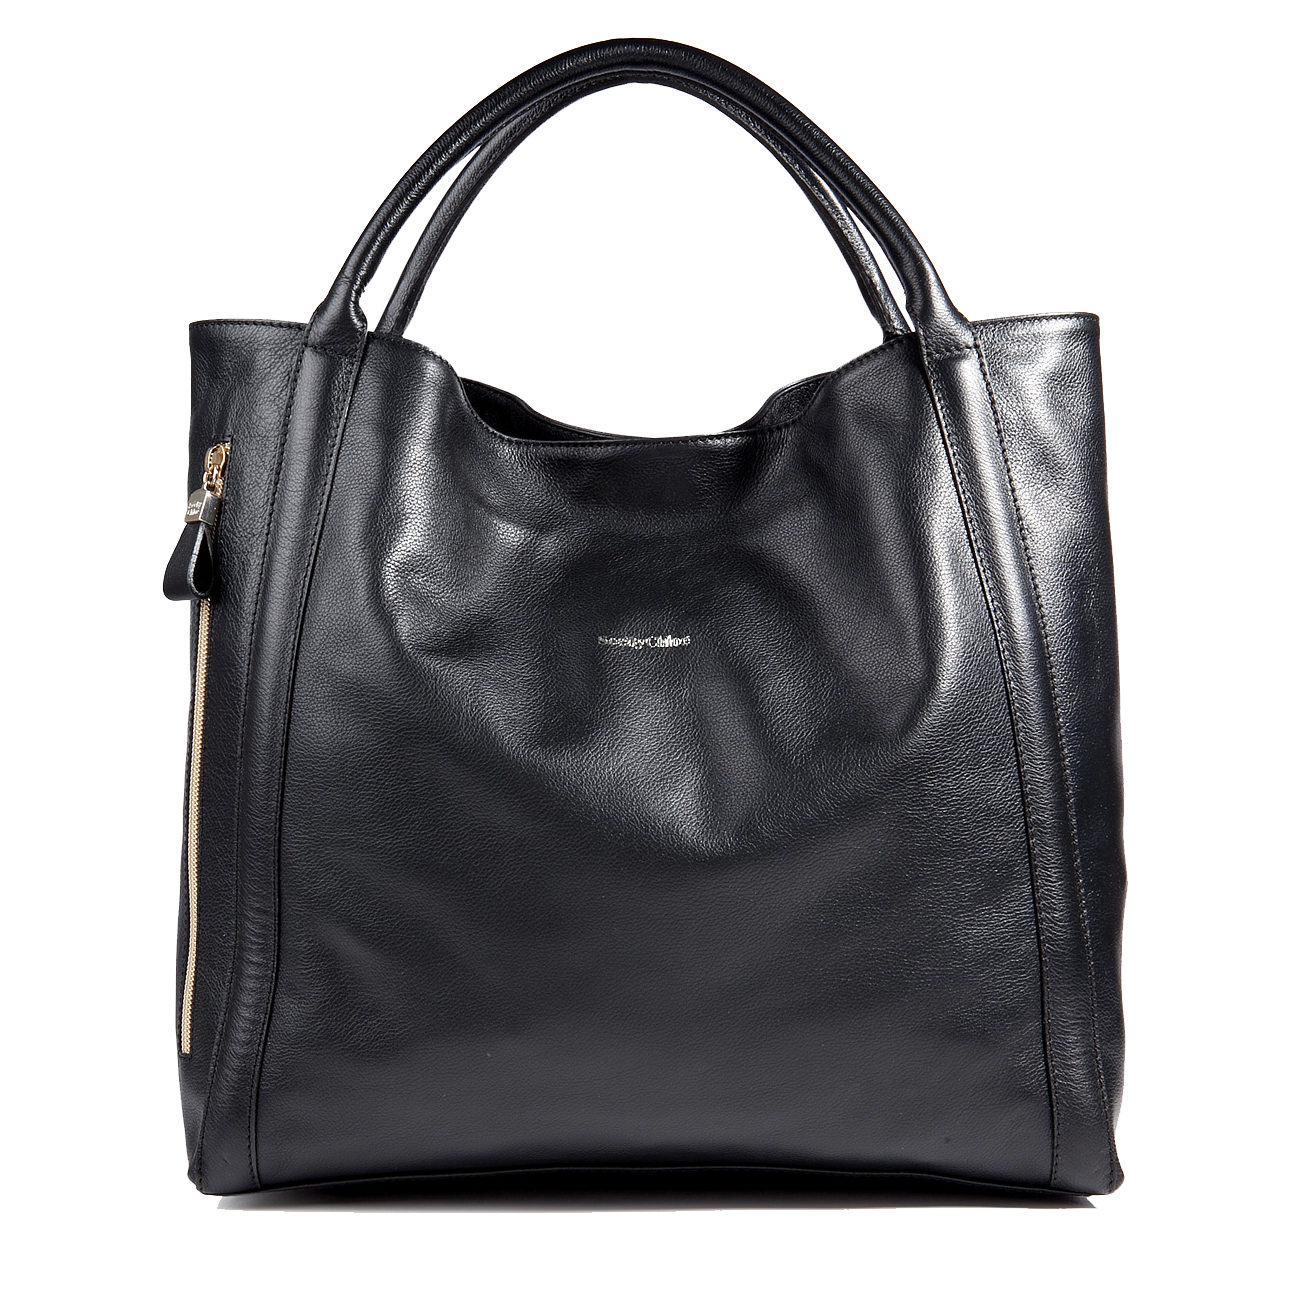 SEE By Chloe leather tote in black